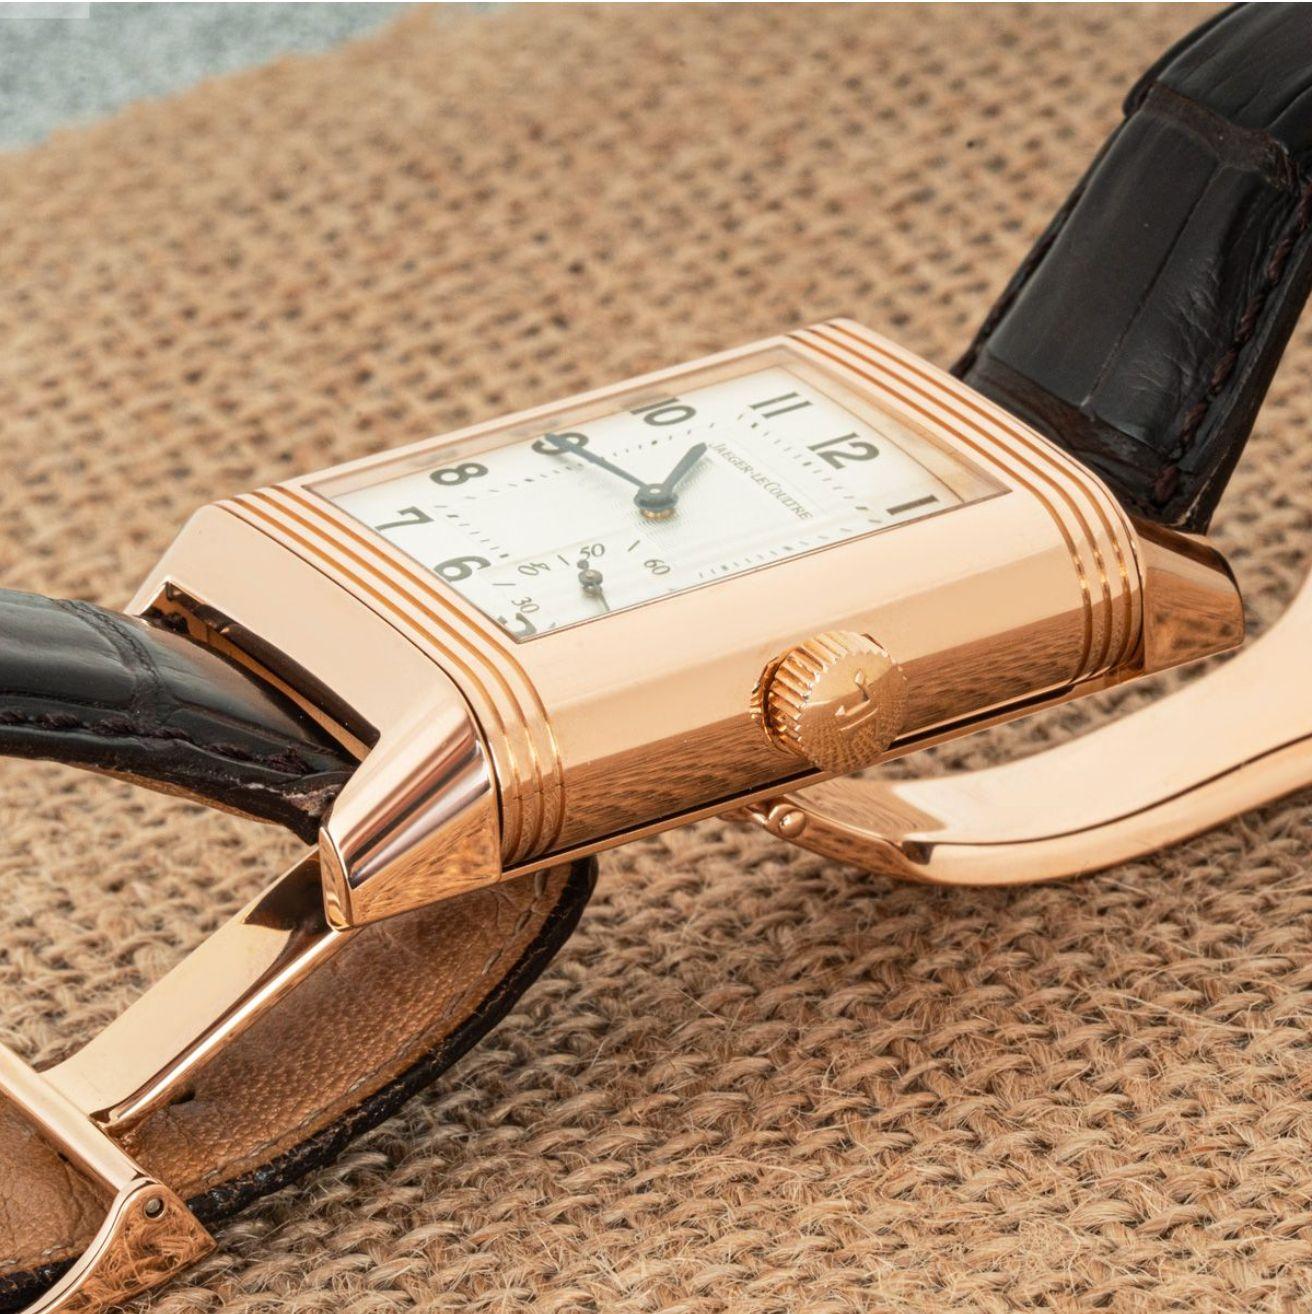 A 29mm rose gold Jaeger LeCoultre Grande Reverso wristwatch. Featuring a silver guilloche dial with a small seconds sub-dial, blue steeled sword-shaped hands and a reversible side which features a power reserve indicator.

Equipped with a Jaeger